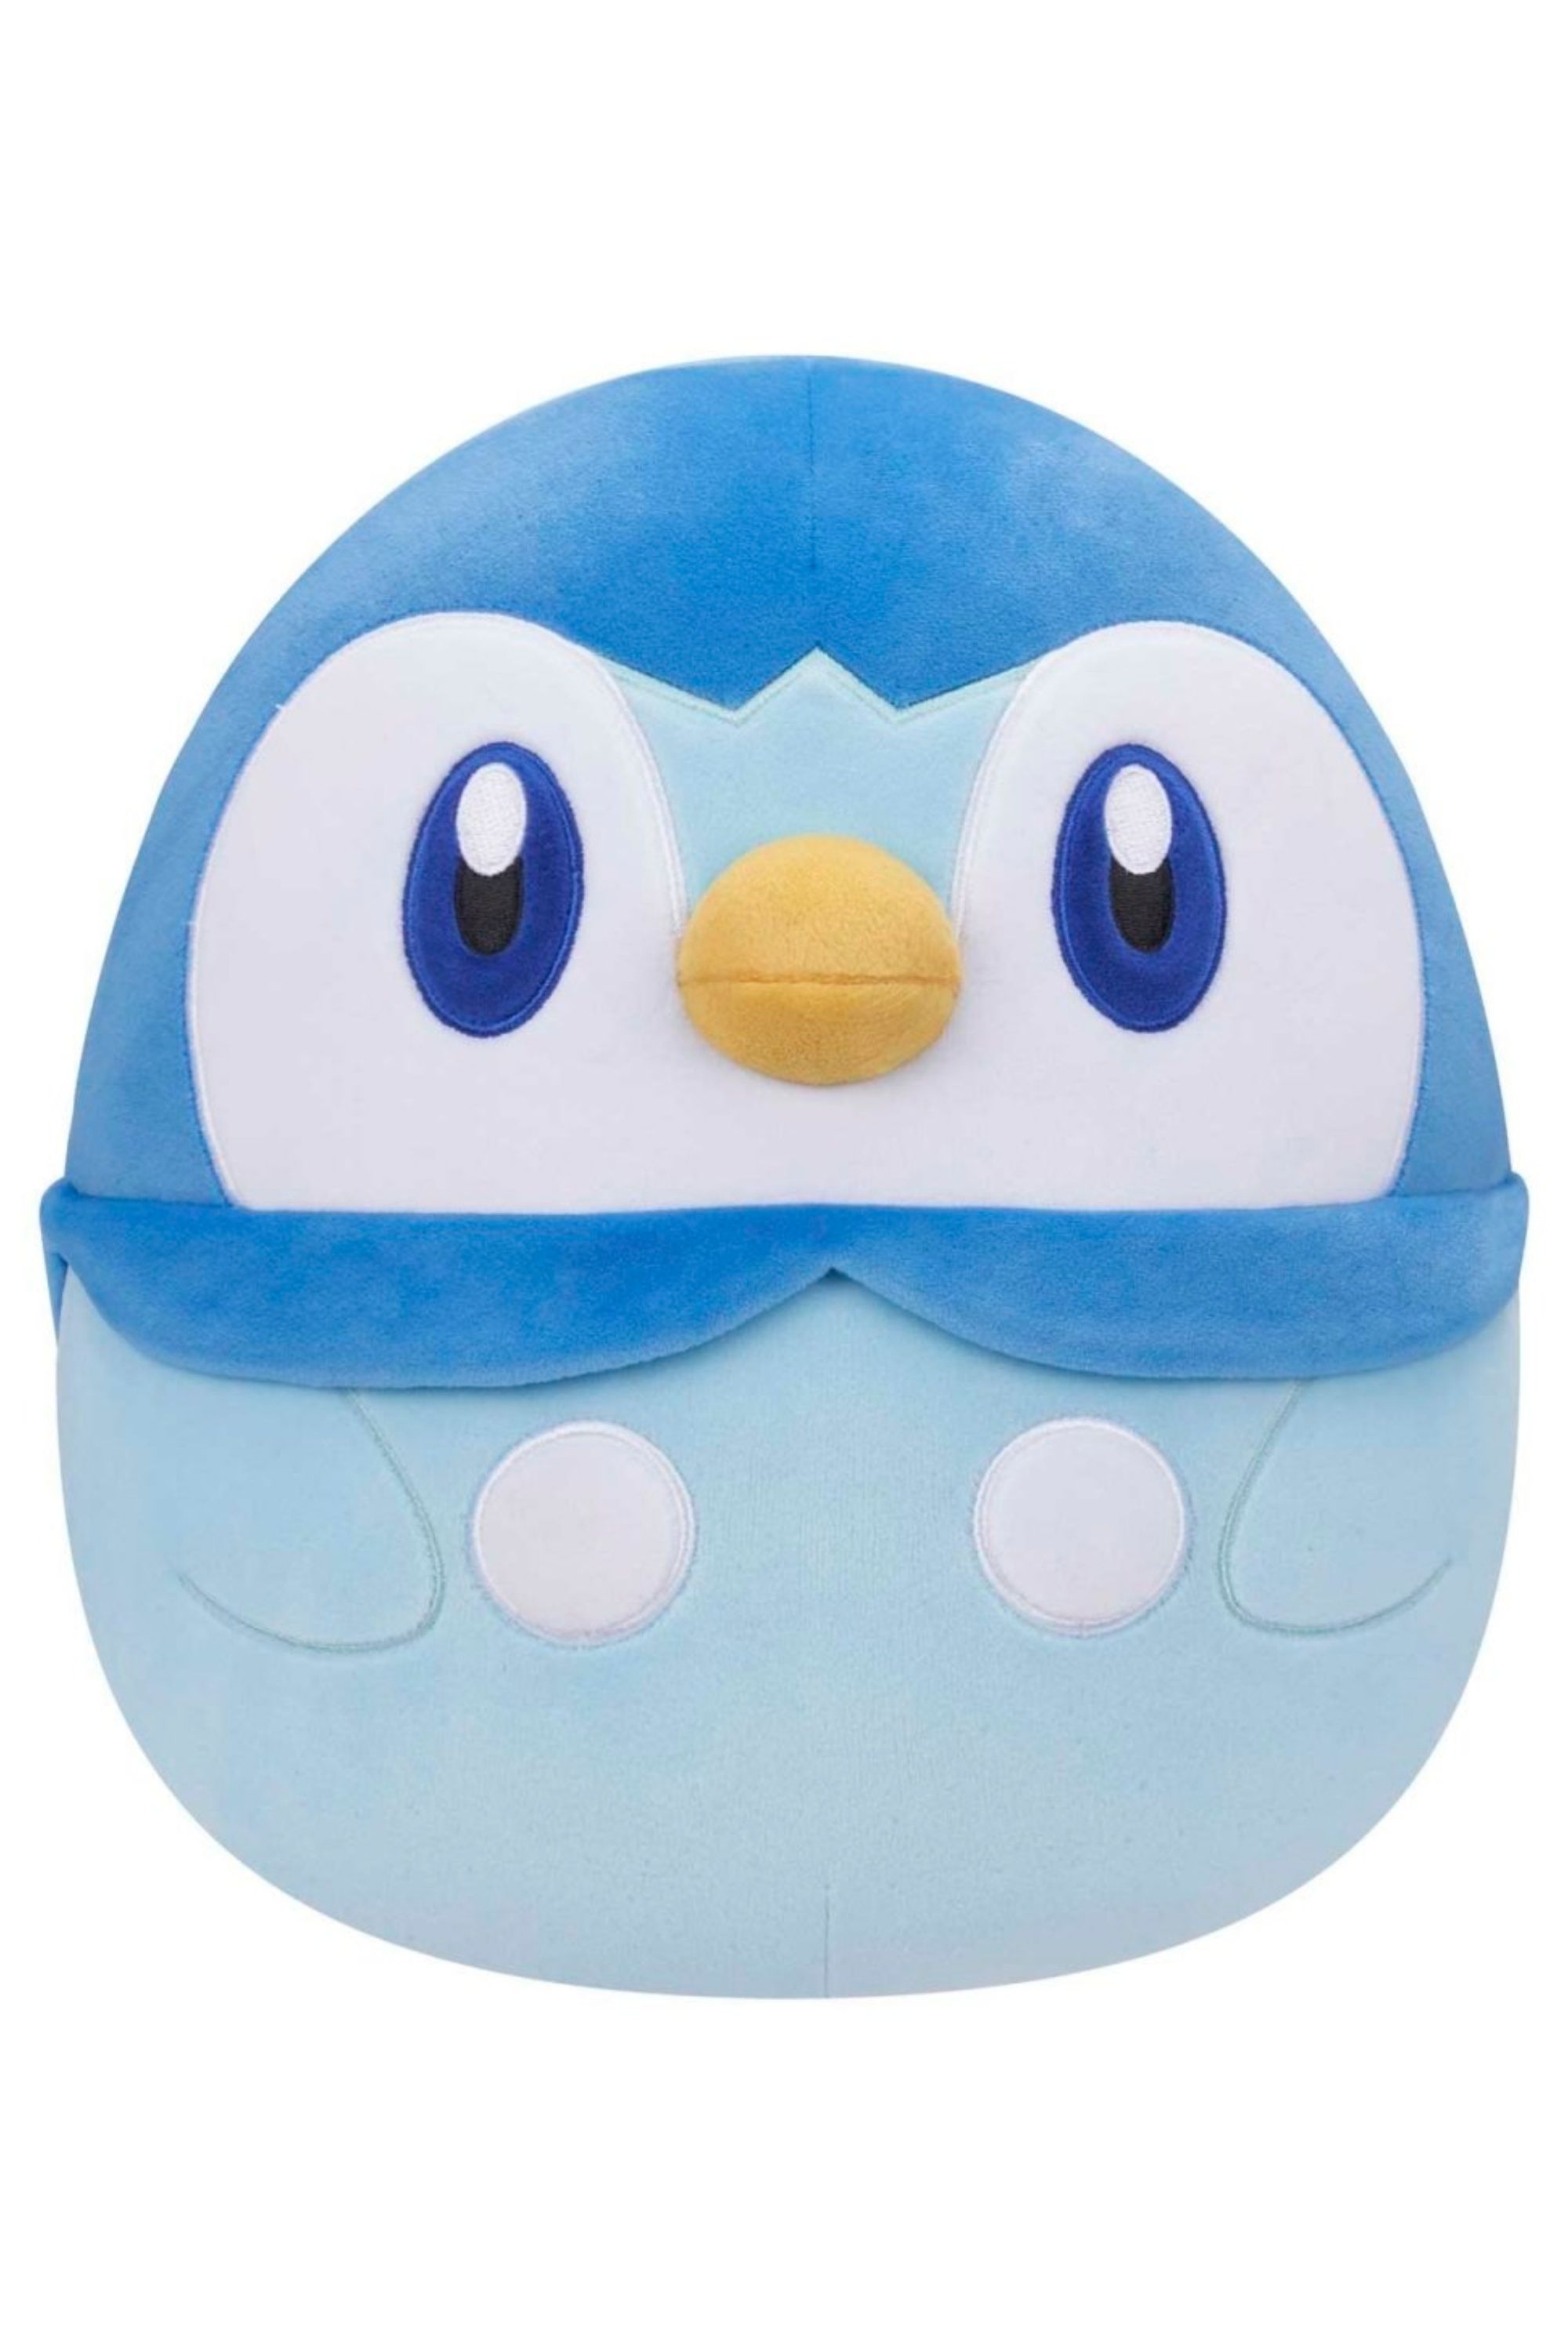 Piplup and winking Pikachu Squishmallows teased